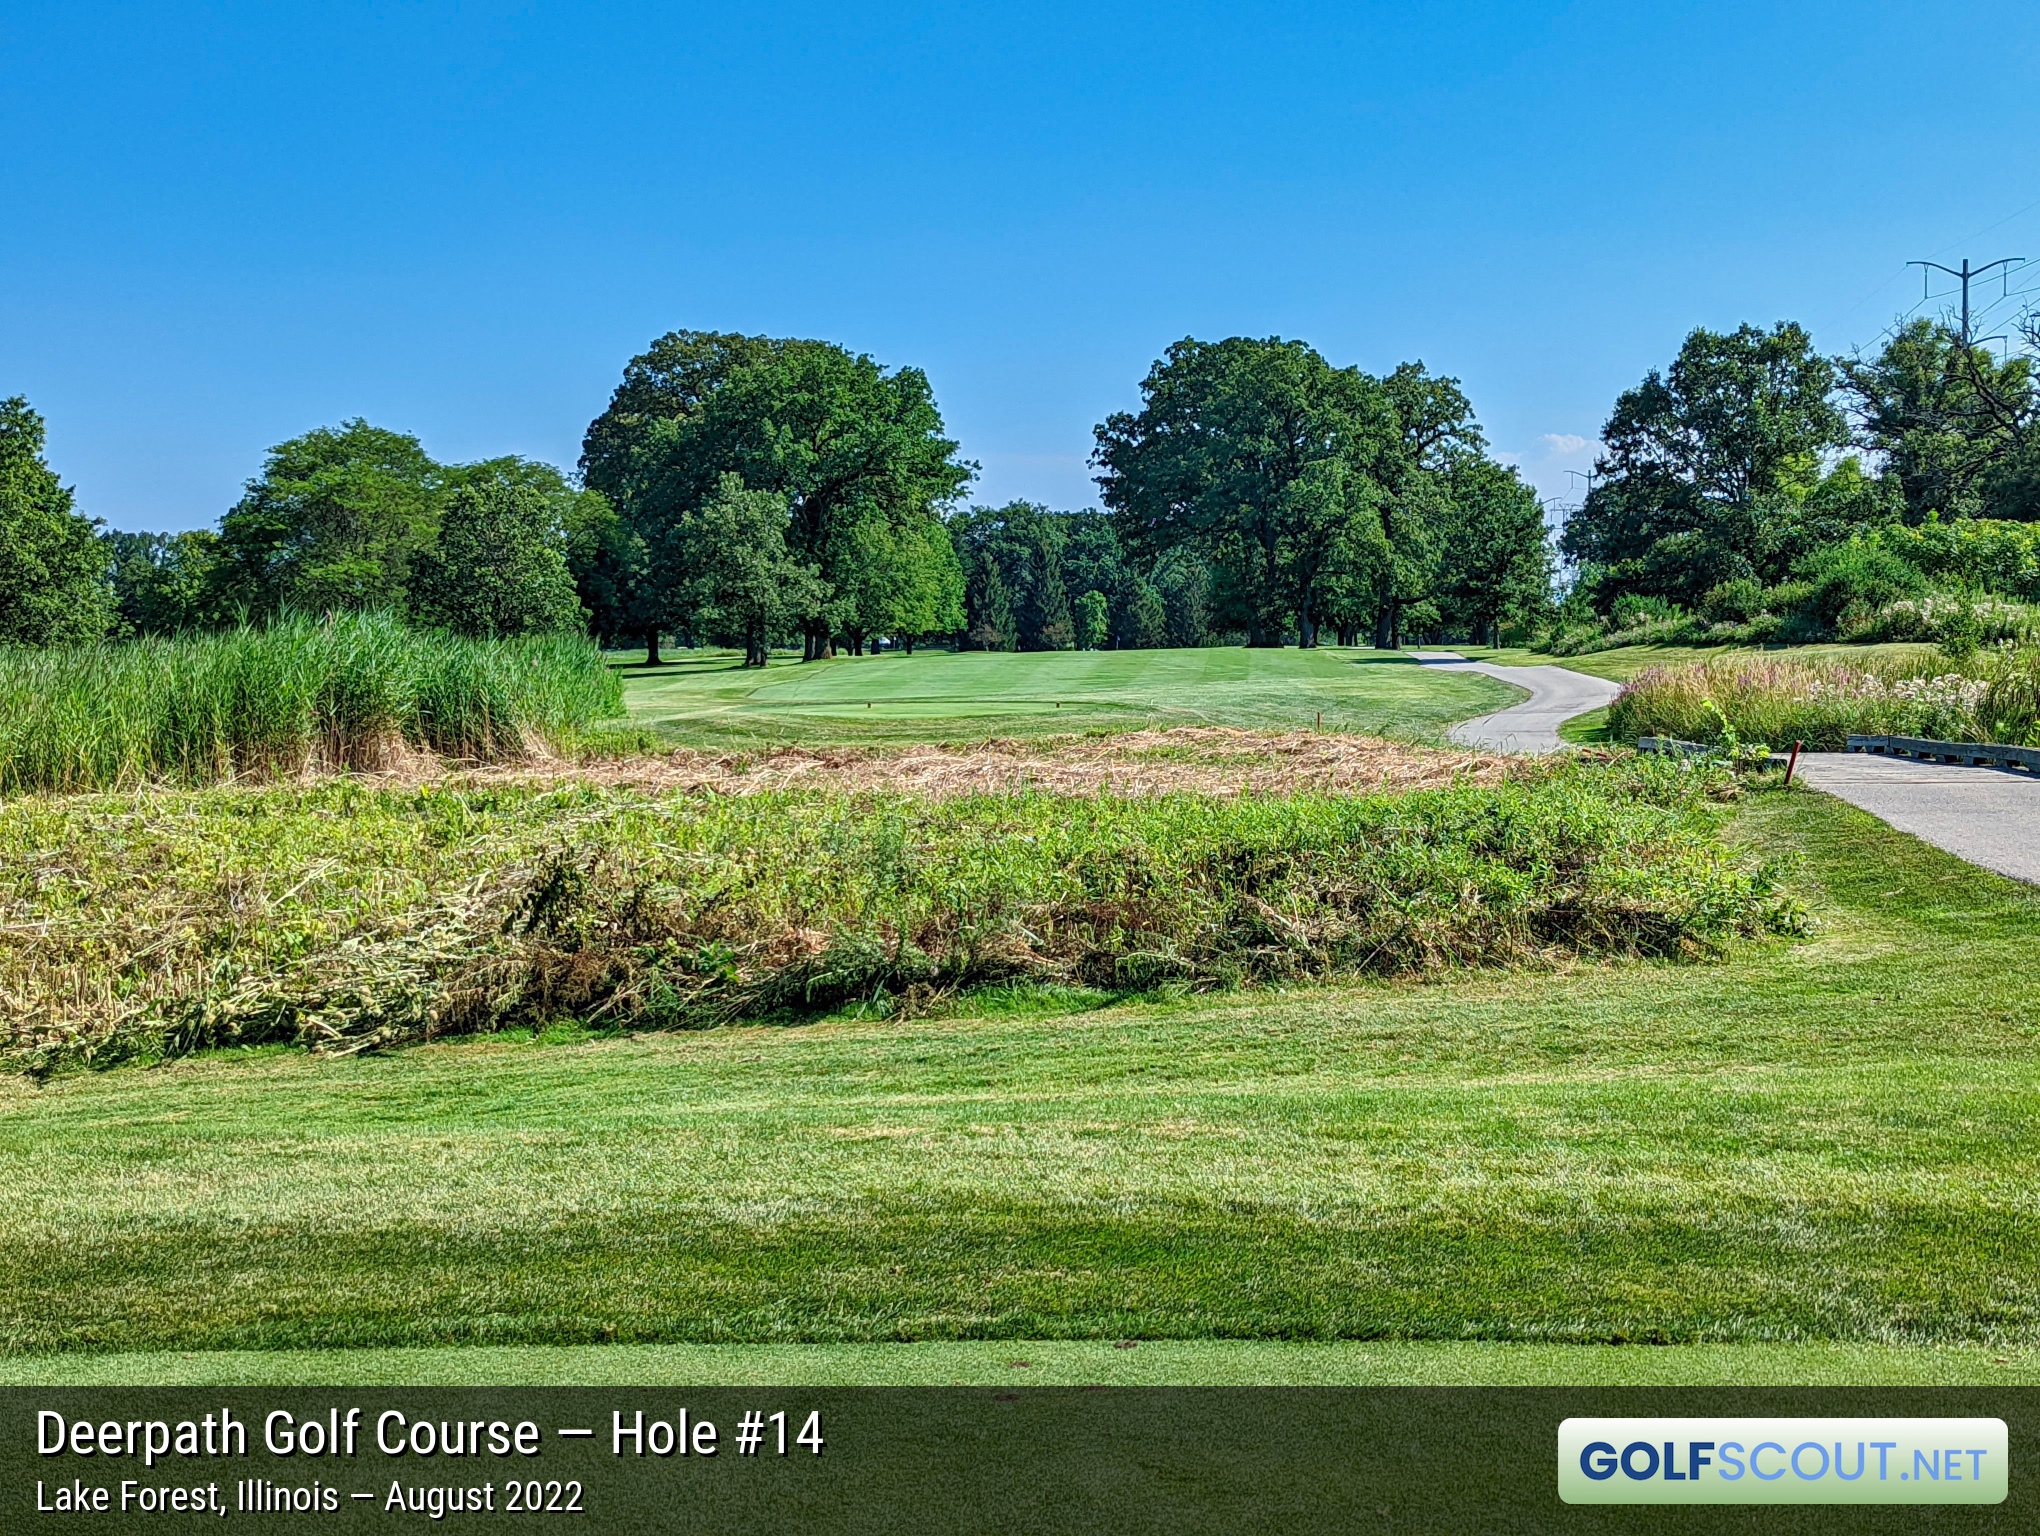 Photo of hole #14 at Deerpath Golf Course in Lake Forest, Illinois. 